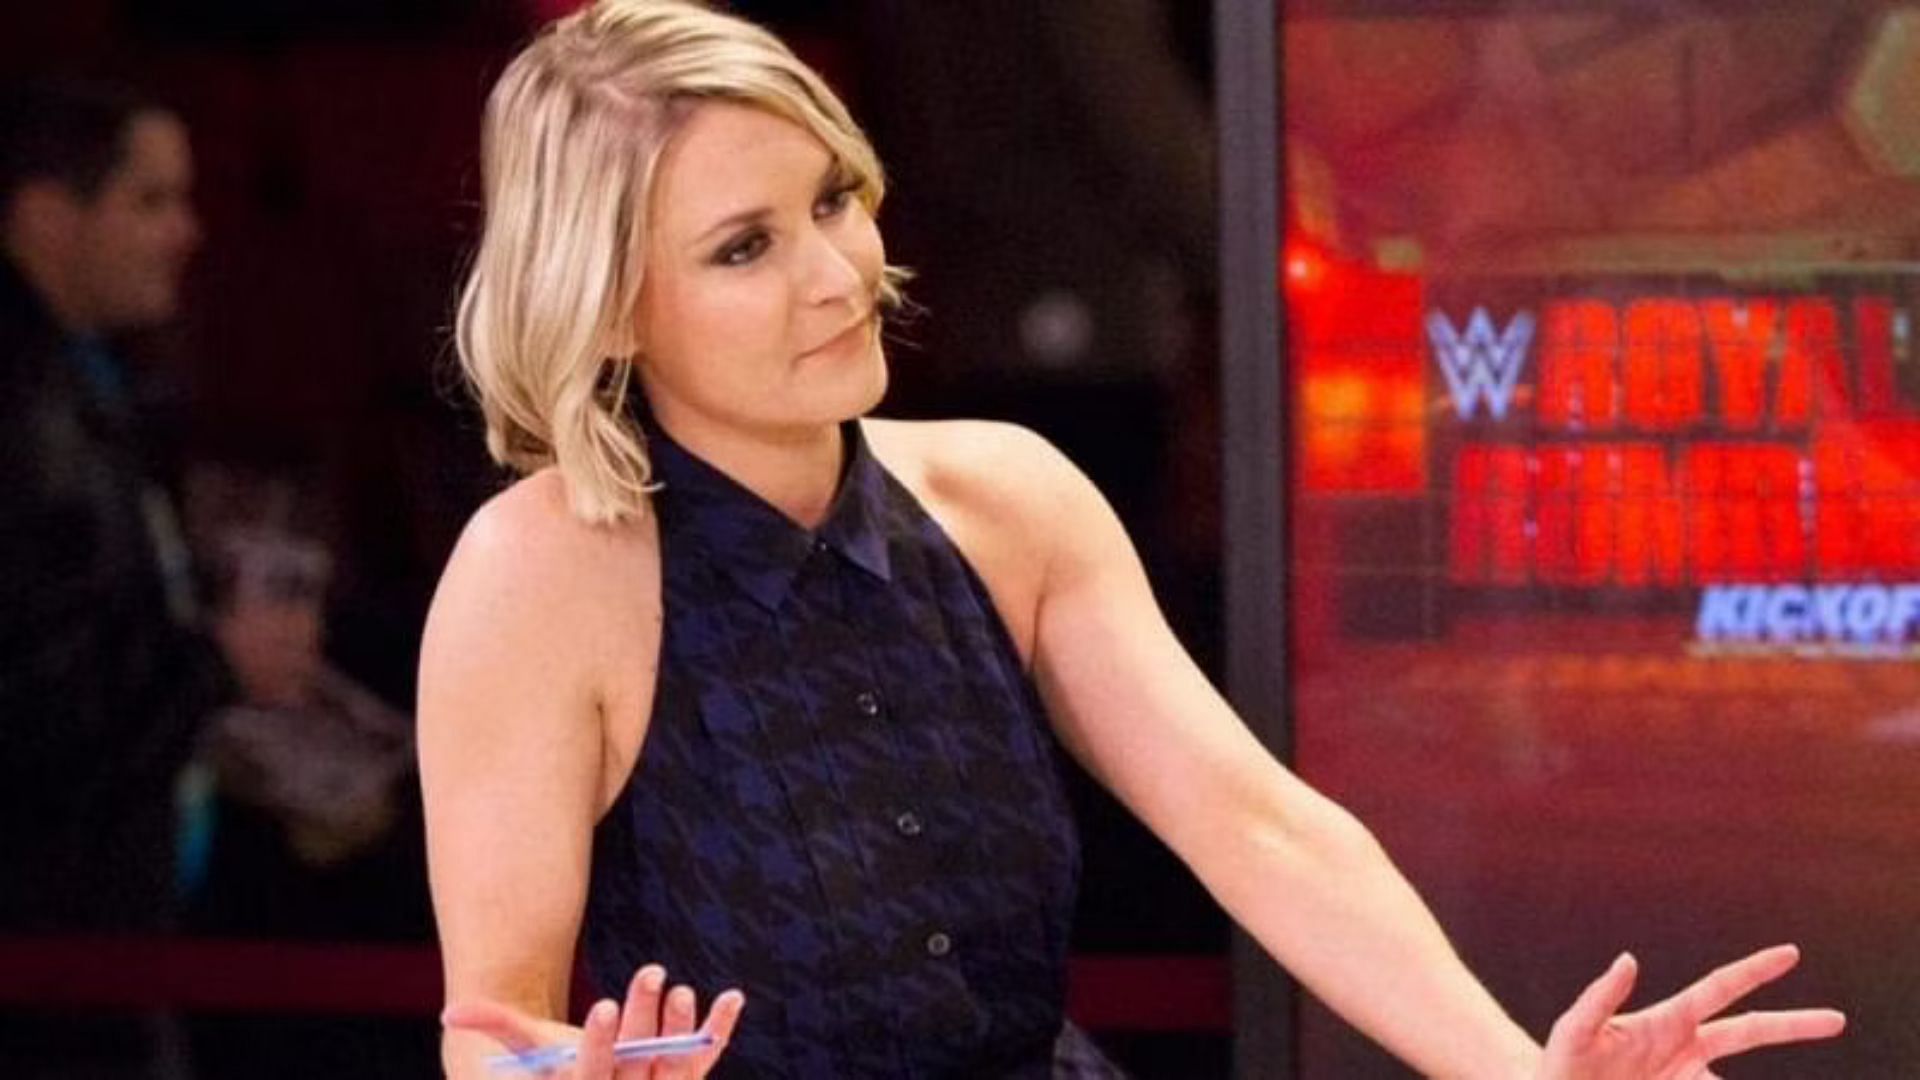 Renee Paquette left World Wrestling Entertainment in 2020